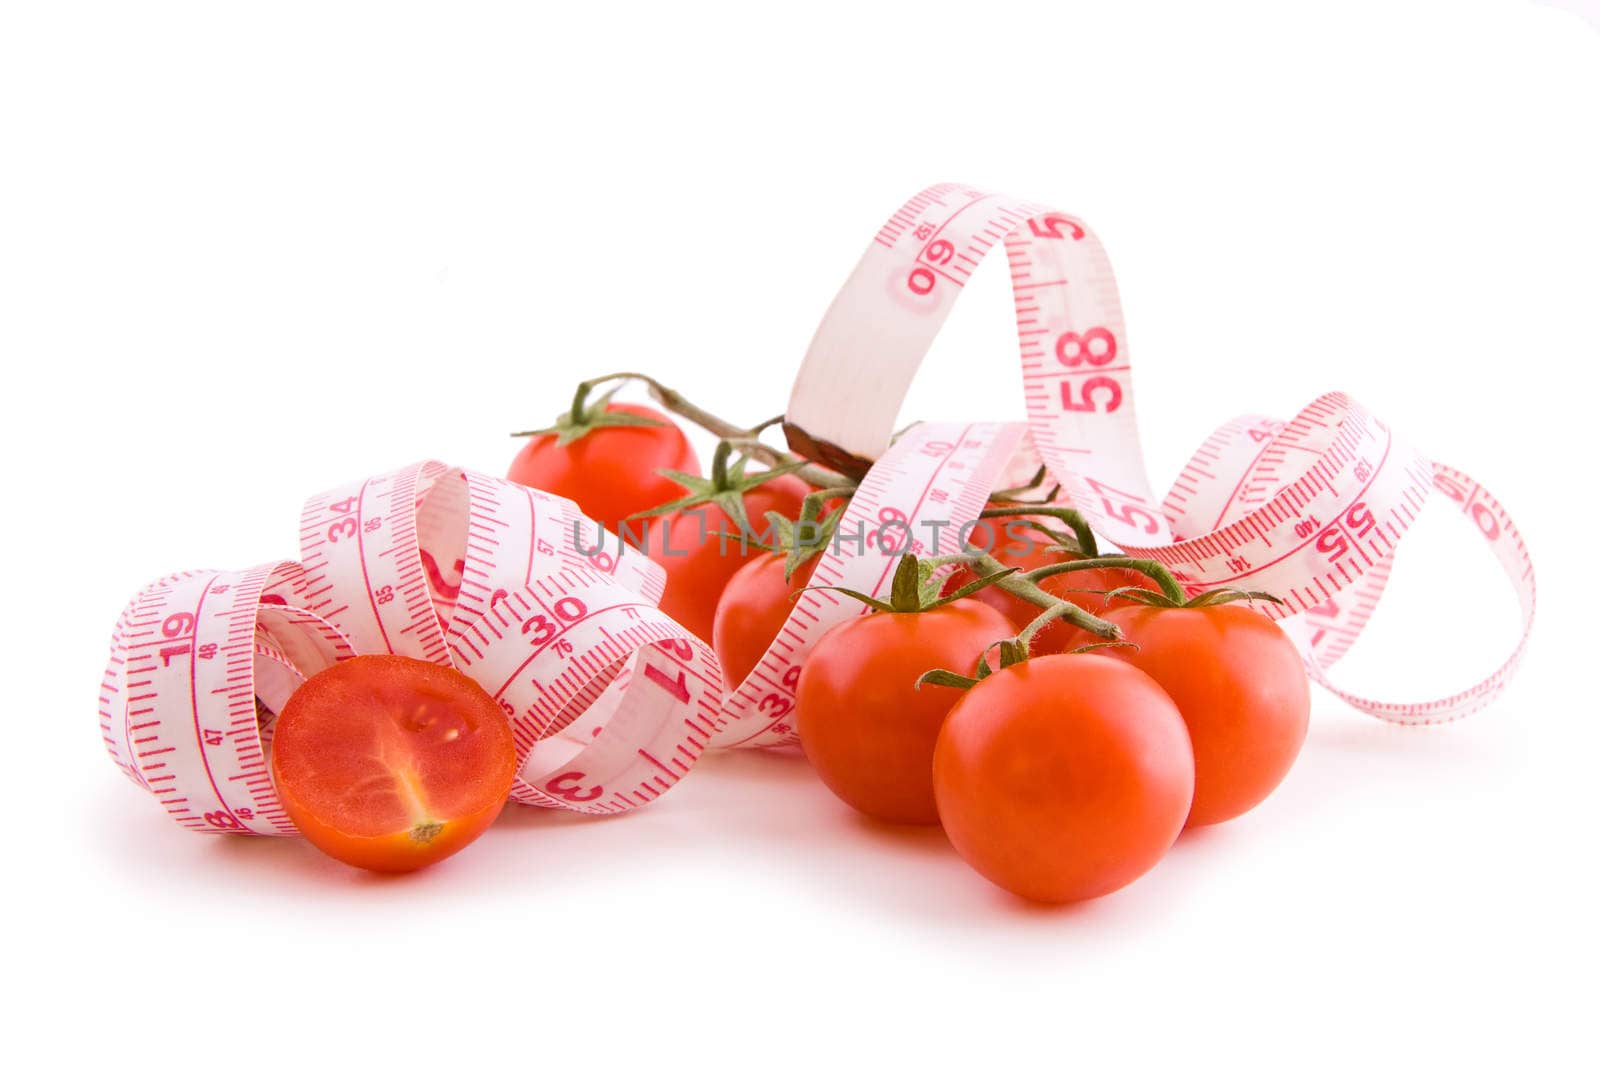 Tomatoes and tailor tape by Gbuglok